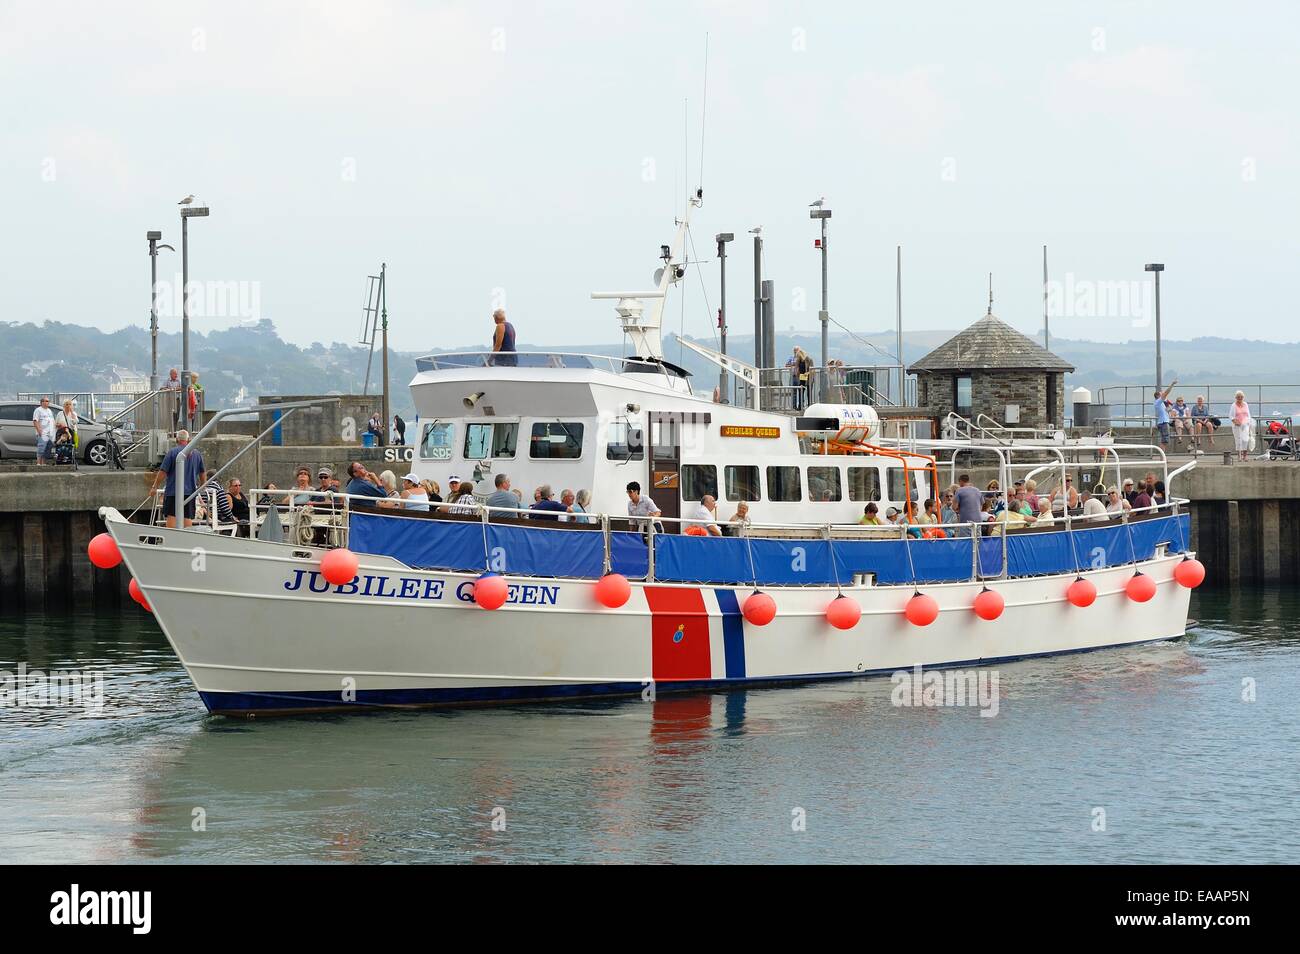 The Jubilee Queen full of passengers leaving Padstow harbour,Cornwall,England uk Stock Photo